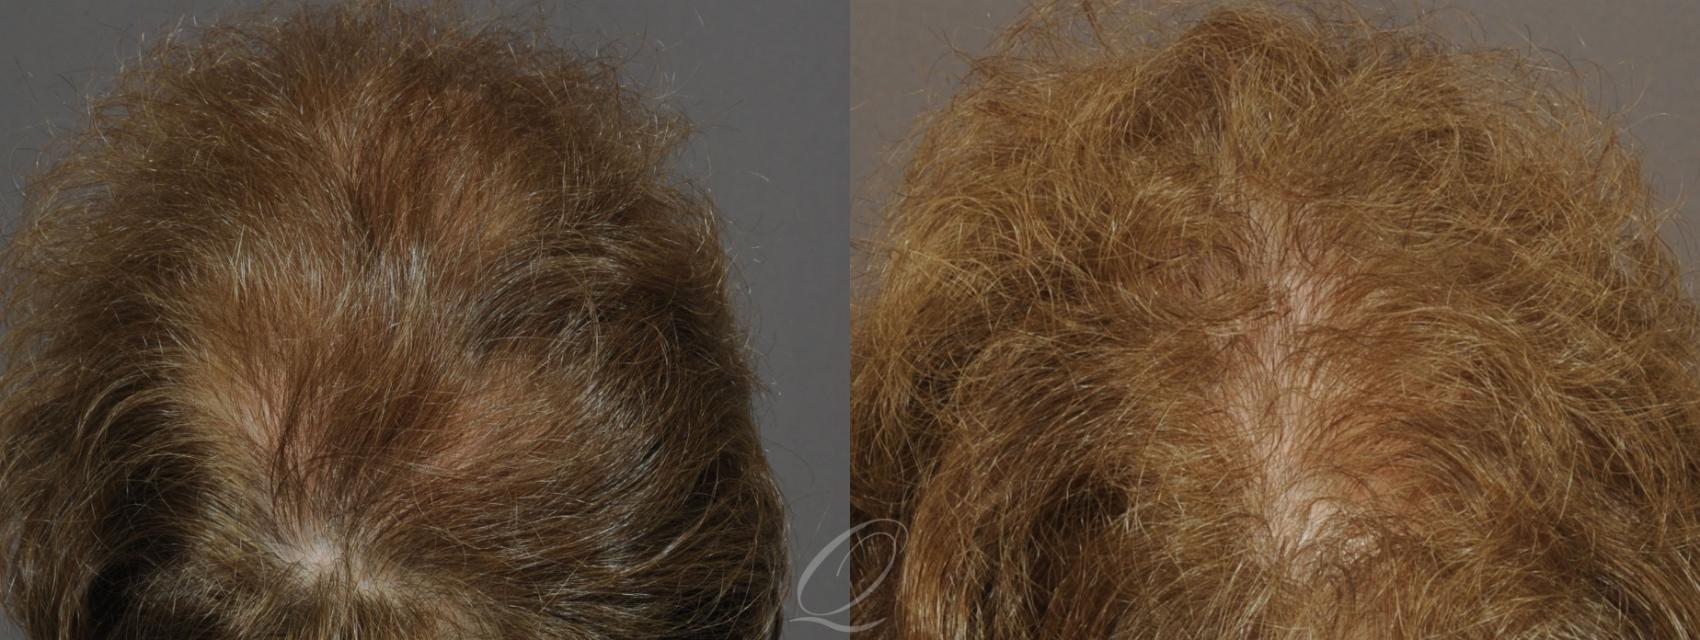 Female FUT Hair Transplant Case 1047 Before & After View #3 | Rochester, Buffalo, & Syracuse, NY | Quatela Center for Hair Restoration